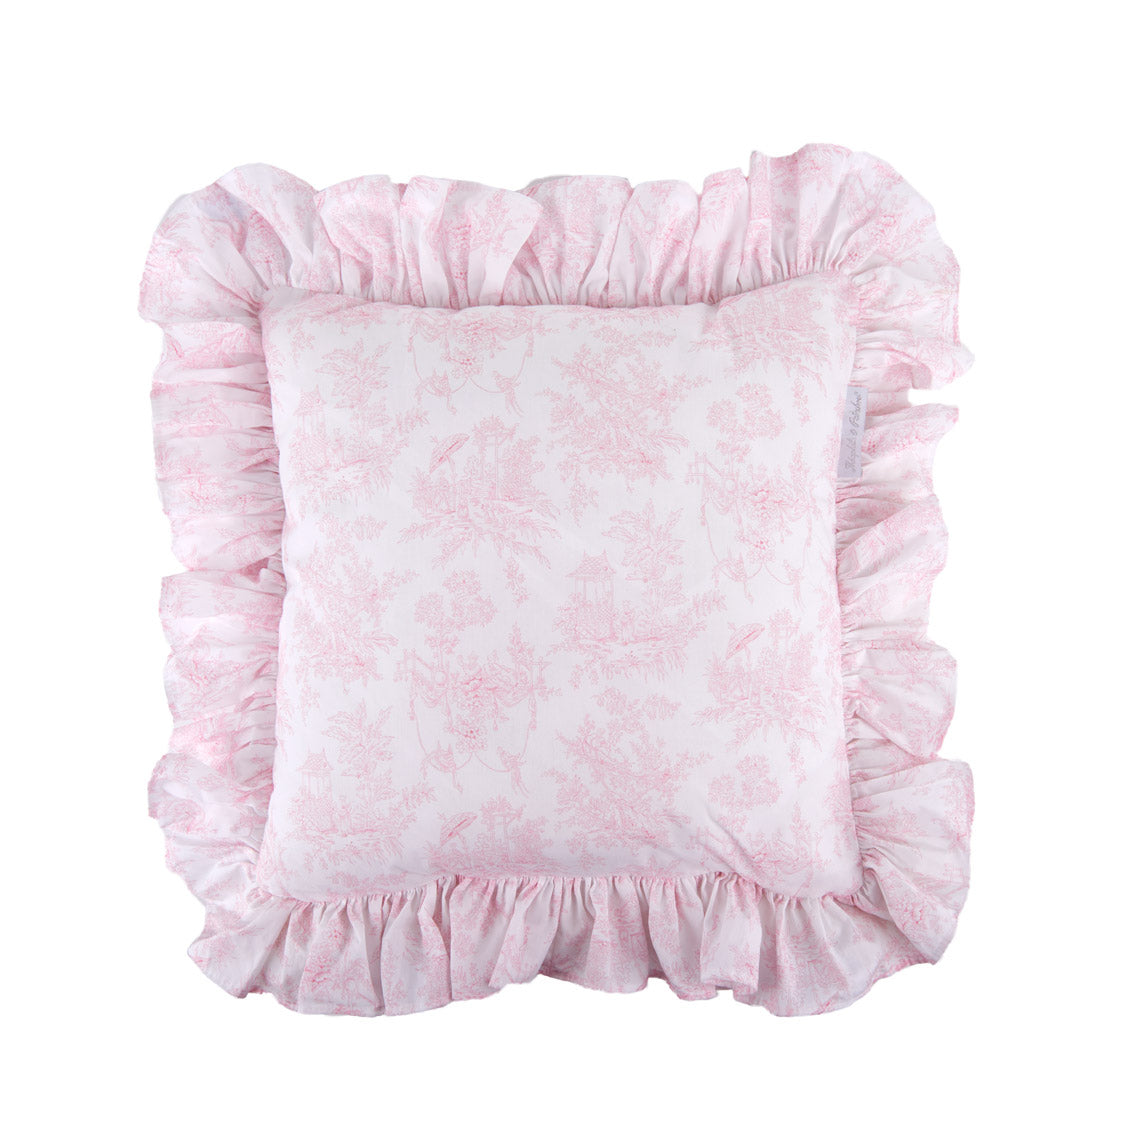 Theophile & Patachou Cushion With Button - Sweet Pink